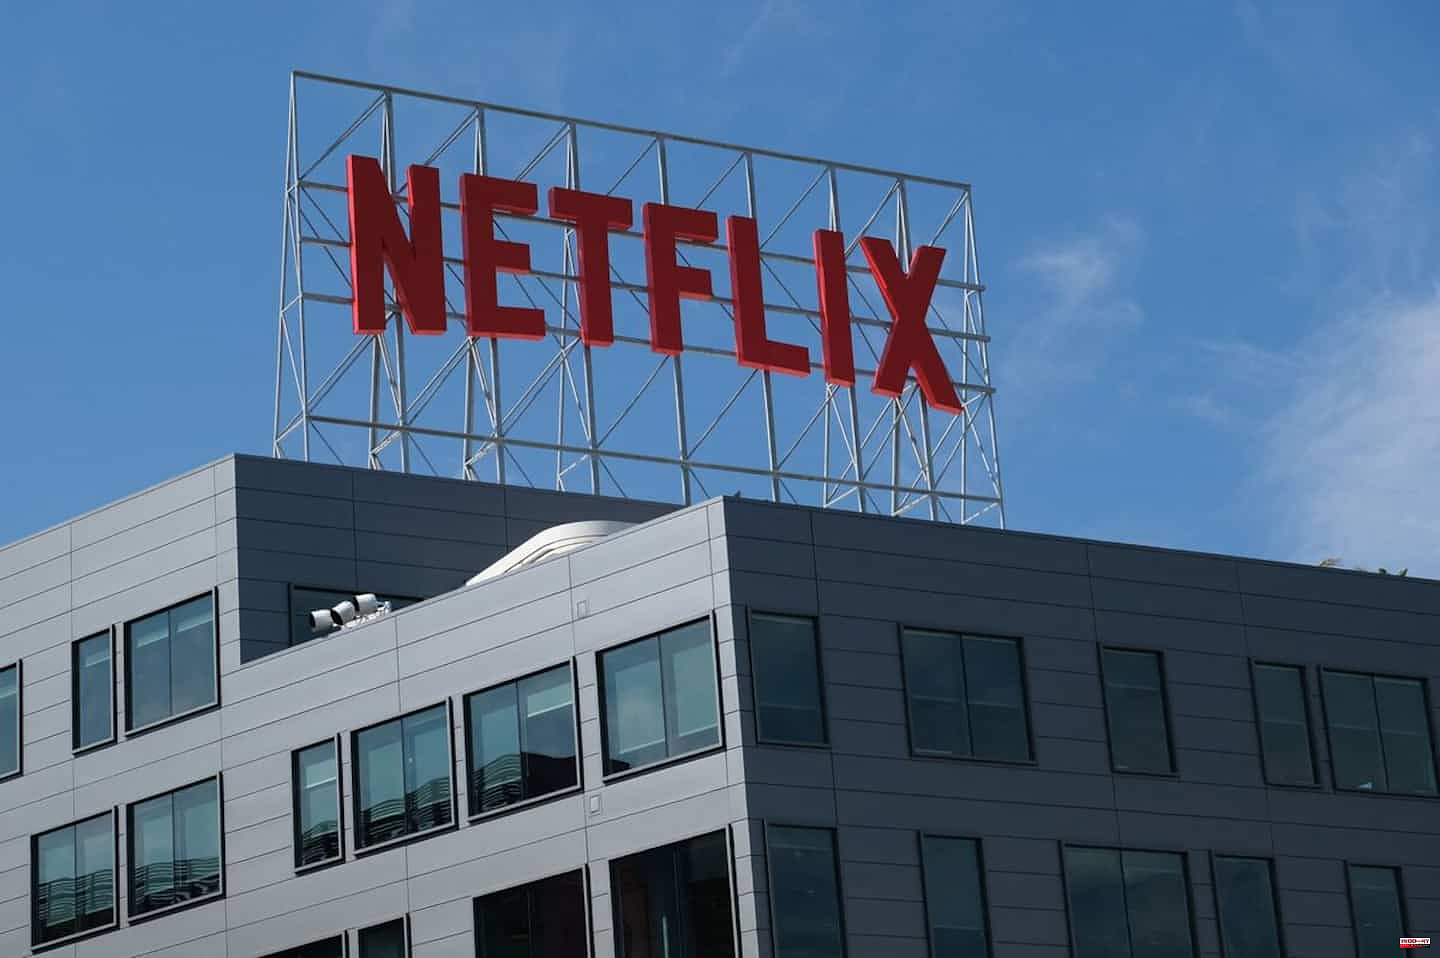 Netflix lays off to cope with slowing growth